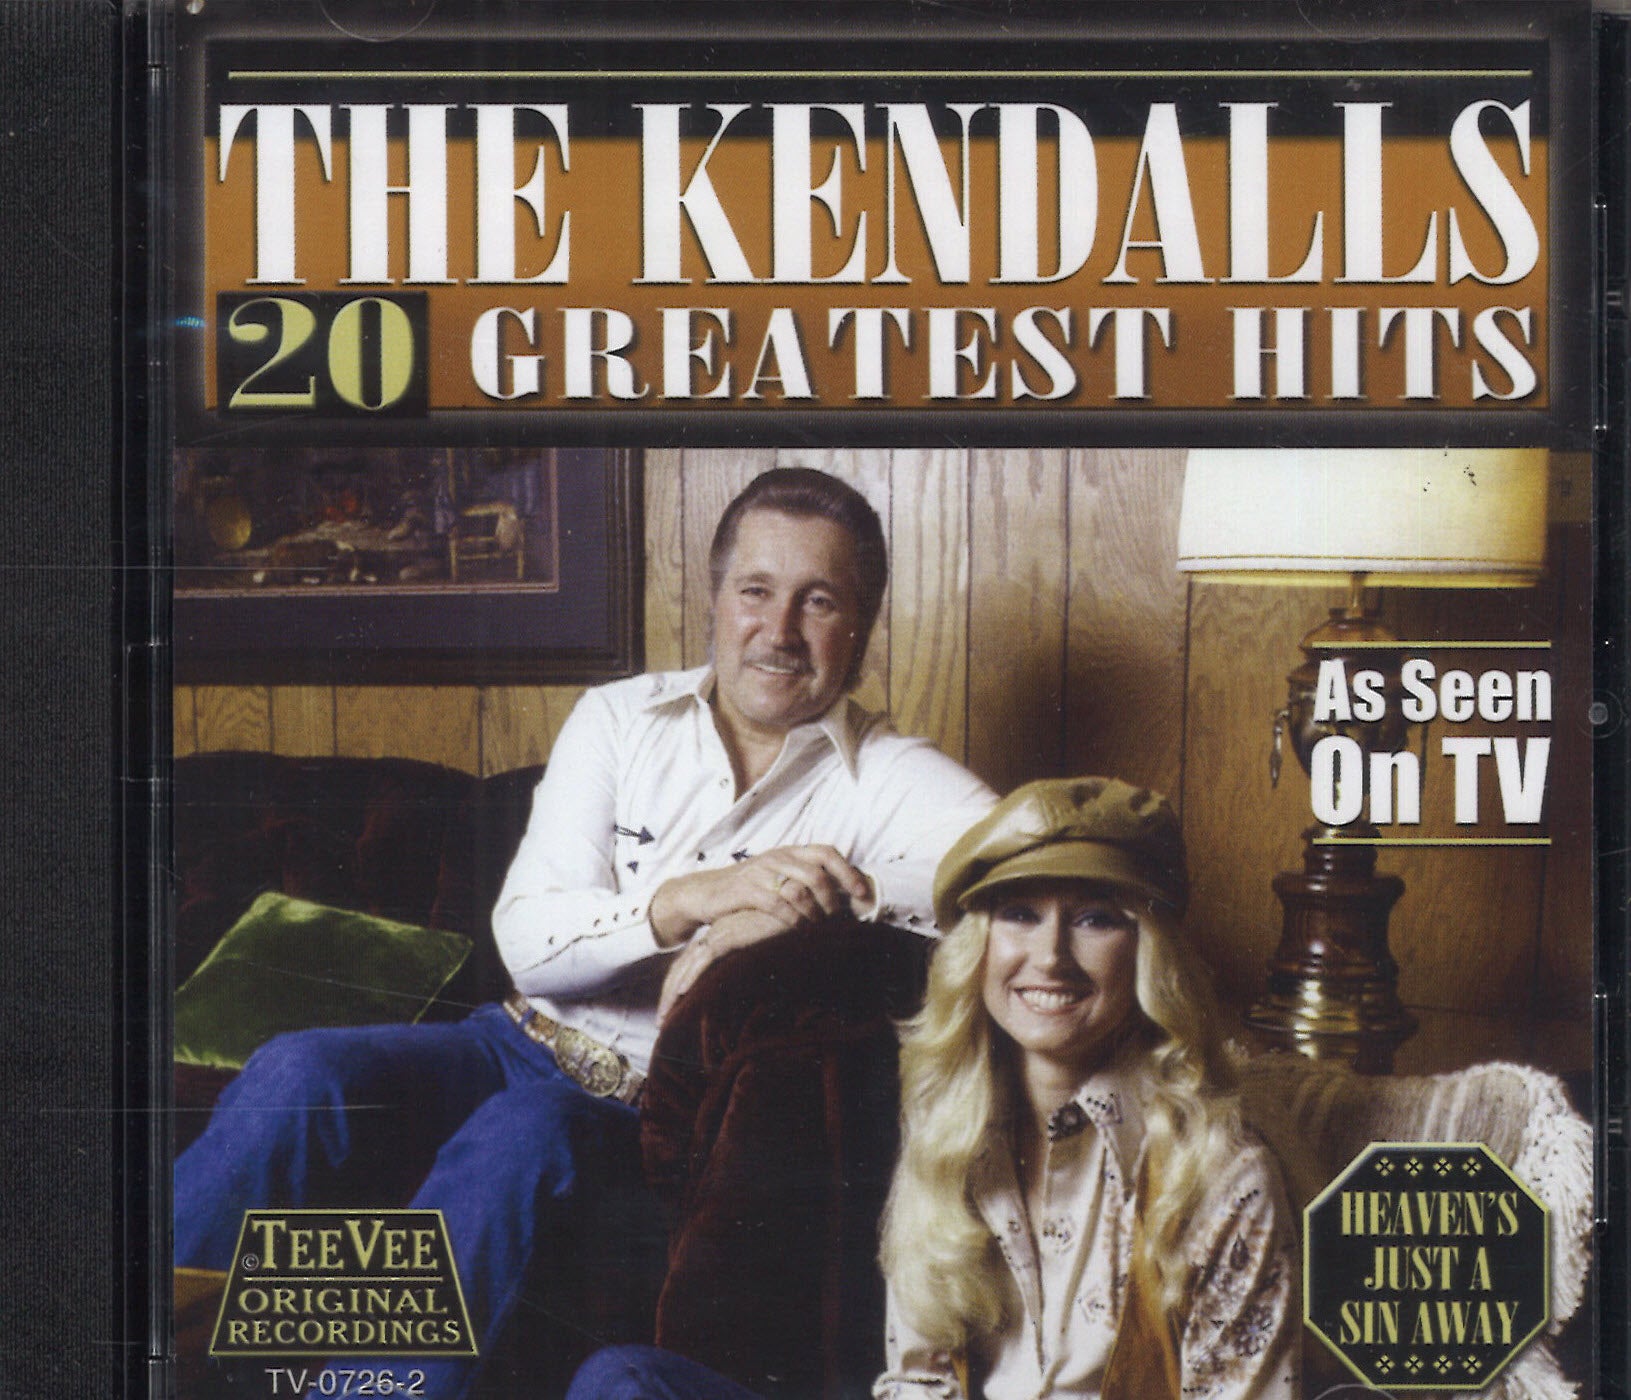 The Kendalls 20 Greatest Hits